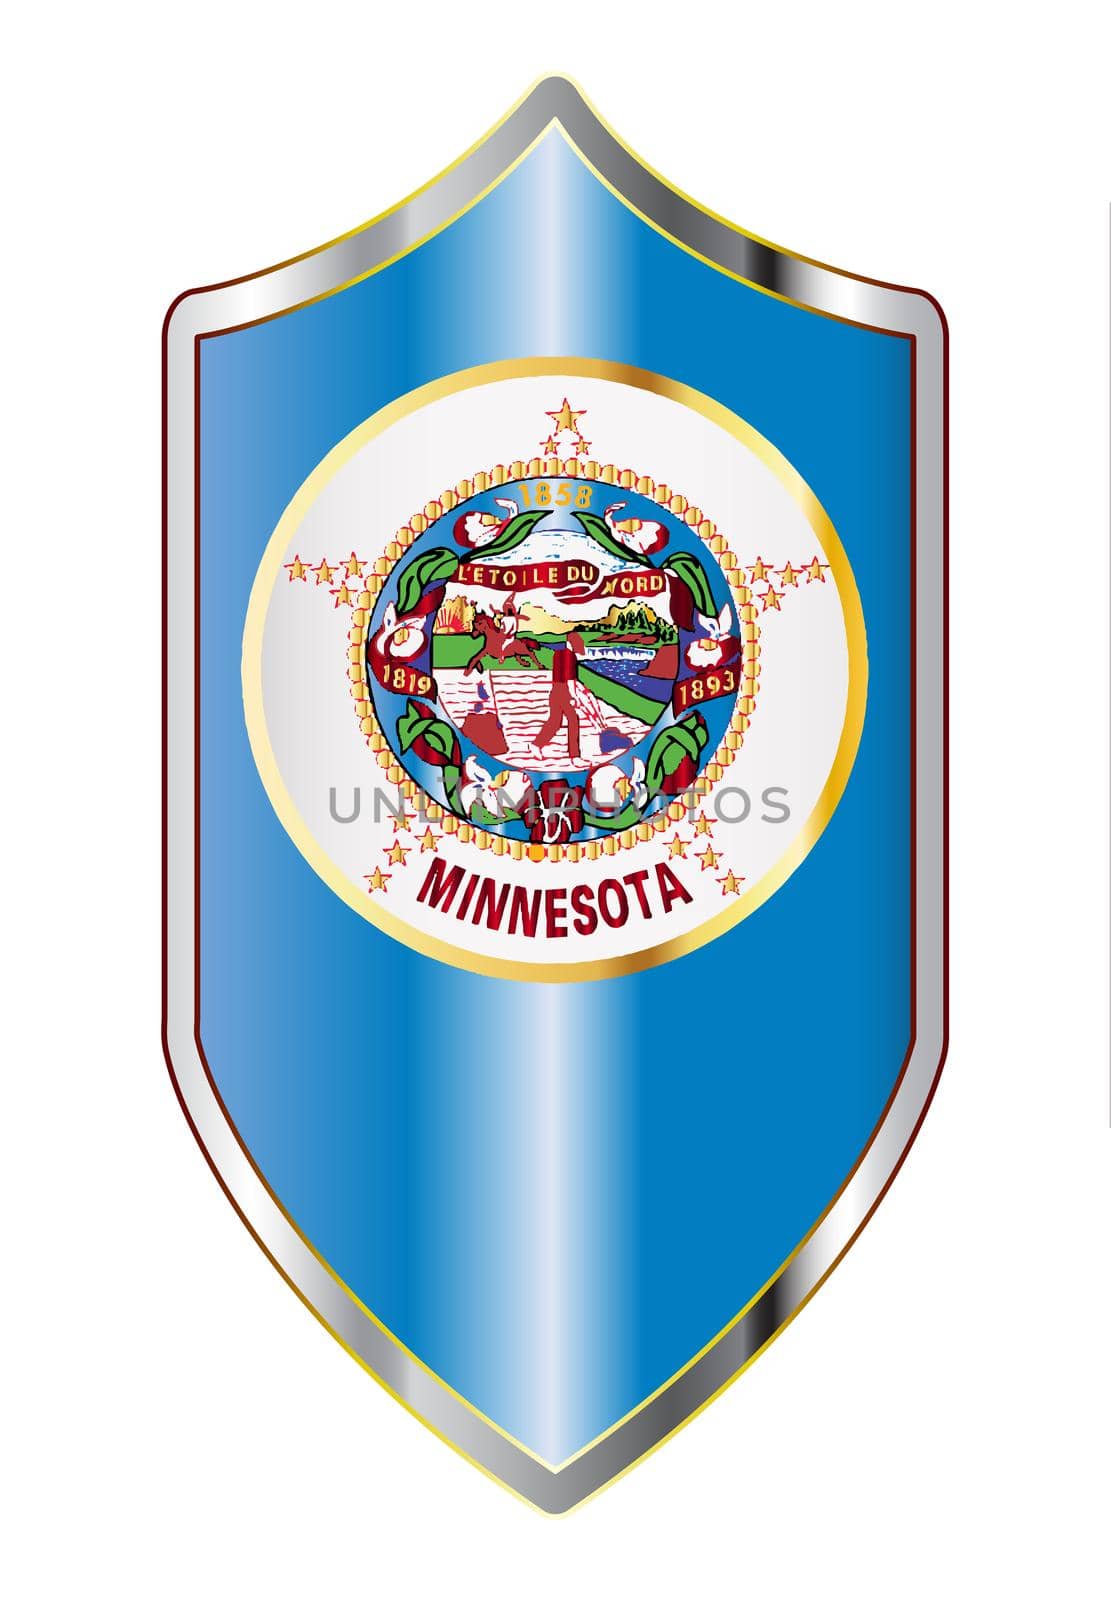 A typical crusader type shield with the state flag of Minnesota all isolated on a white background